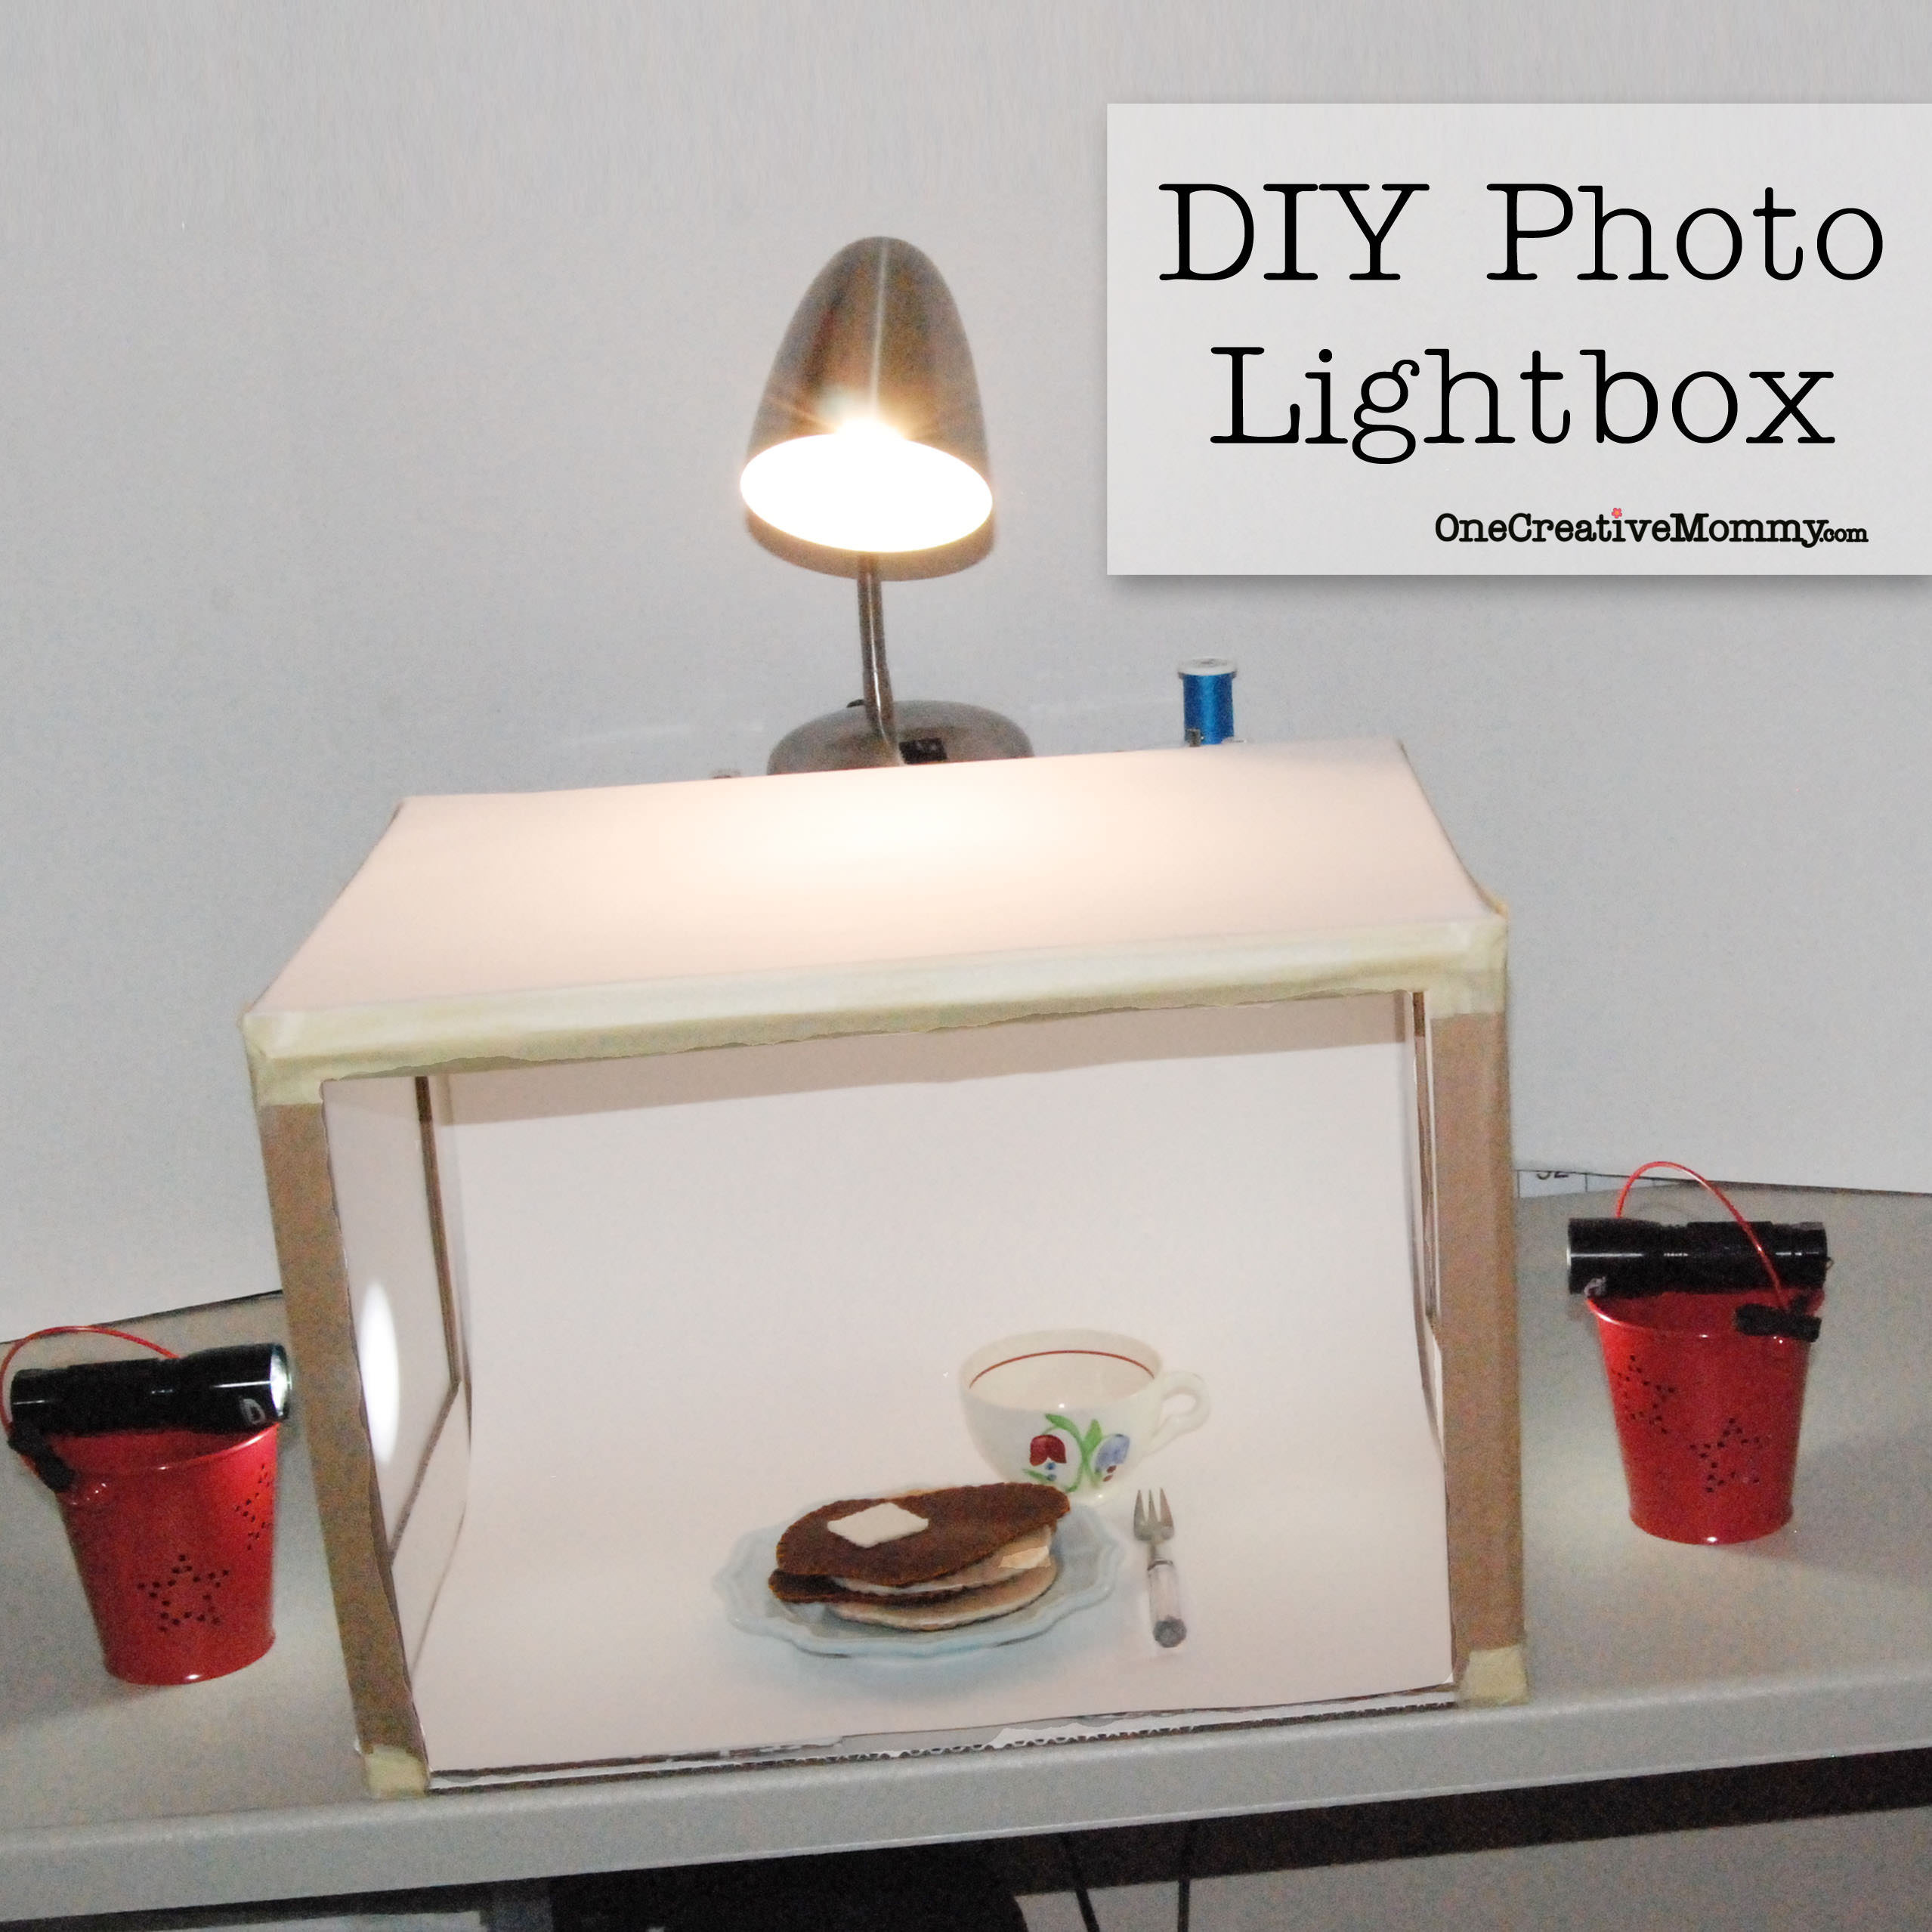 Best ideas about DIY Photography Lightbox
. Save or Pin Grow Your Blog Series DIY Lightbox onecreativemommy Now.